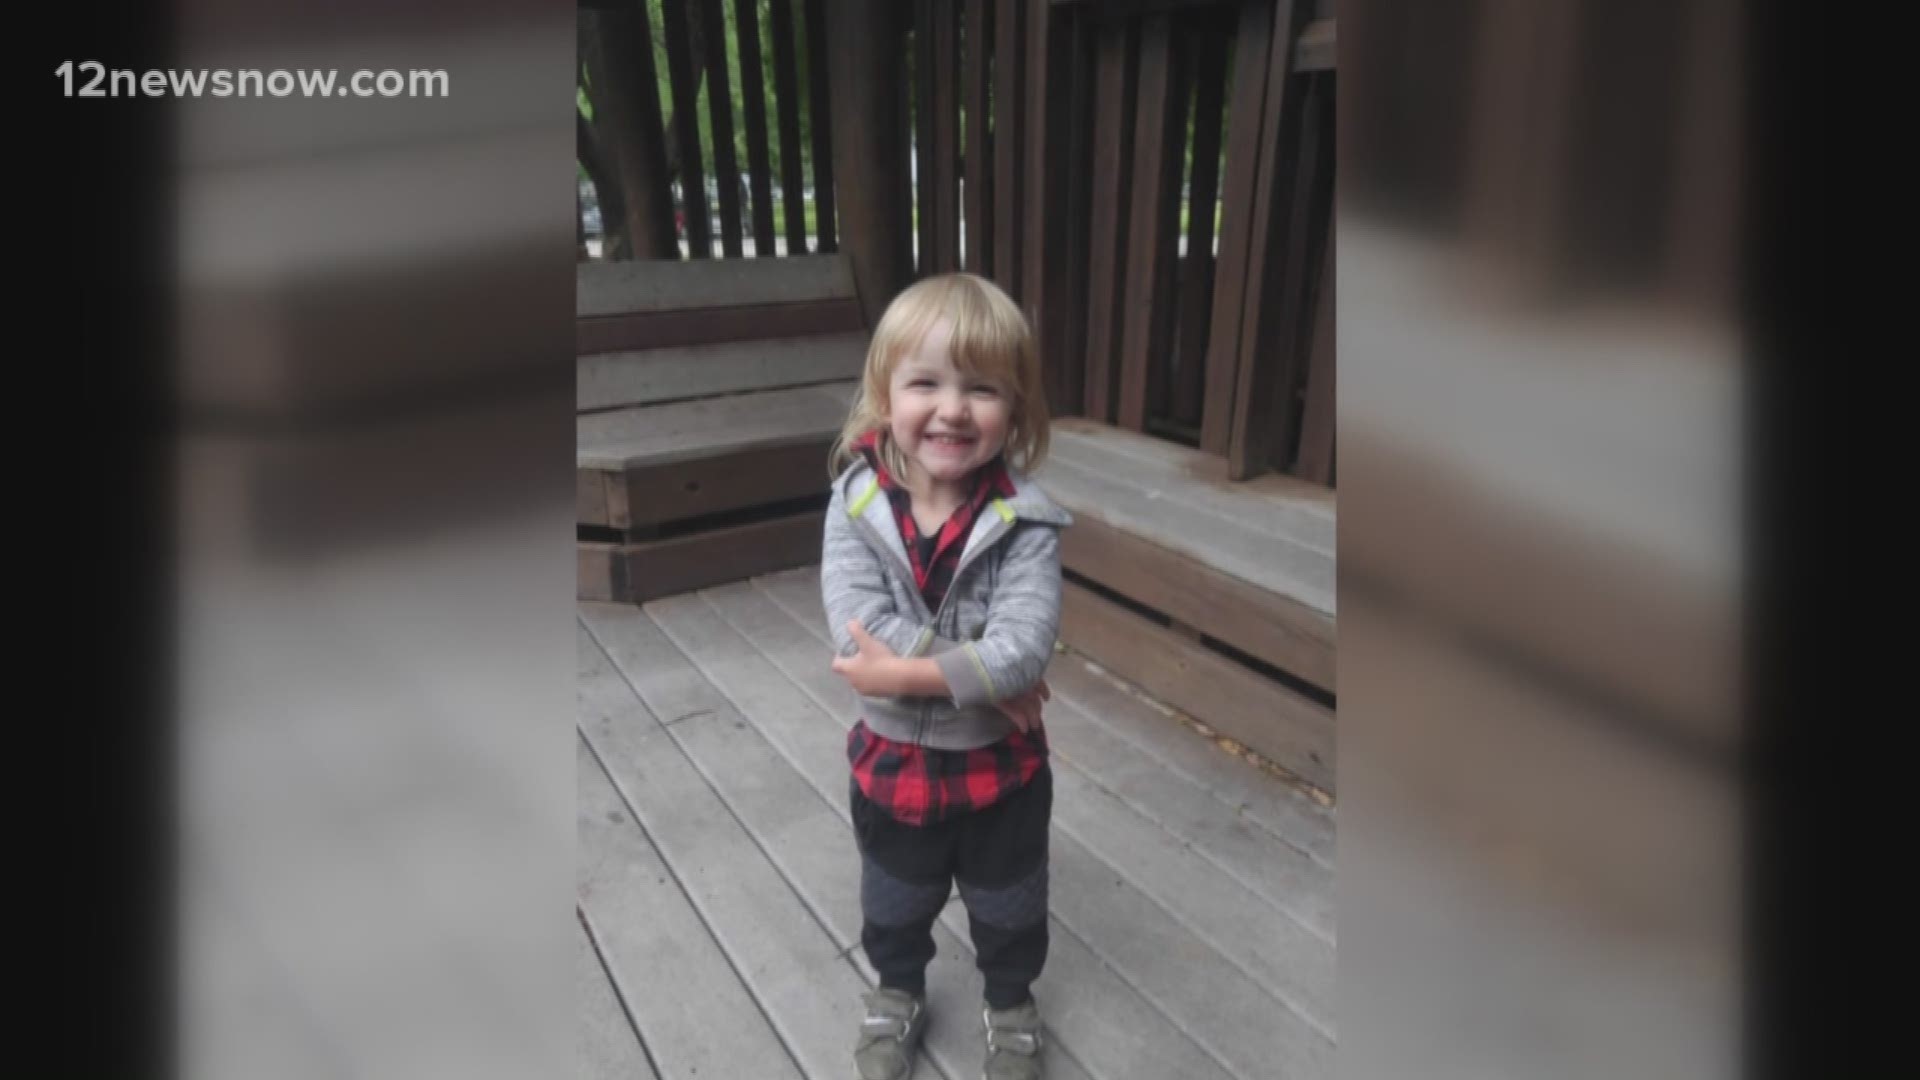 Port Neches family mourns death of 2-year-old pulled from residential pool over weekend